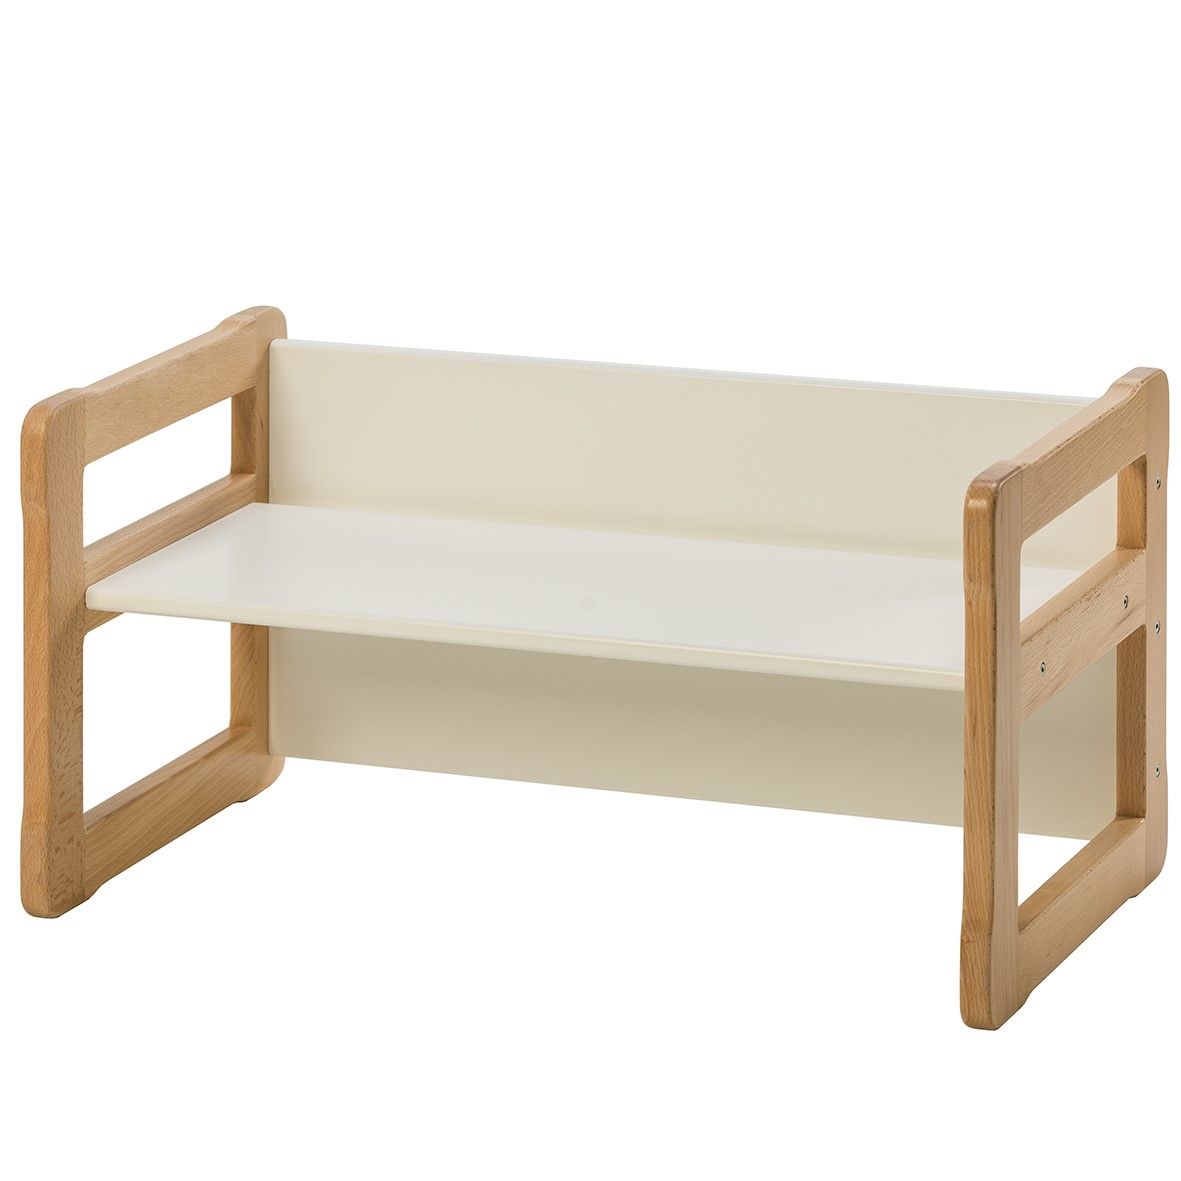 MULTIFUNCTIONAL SMALL BENCH